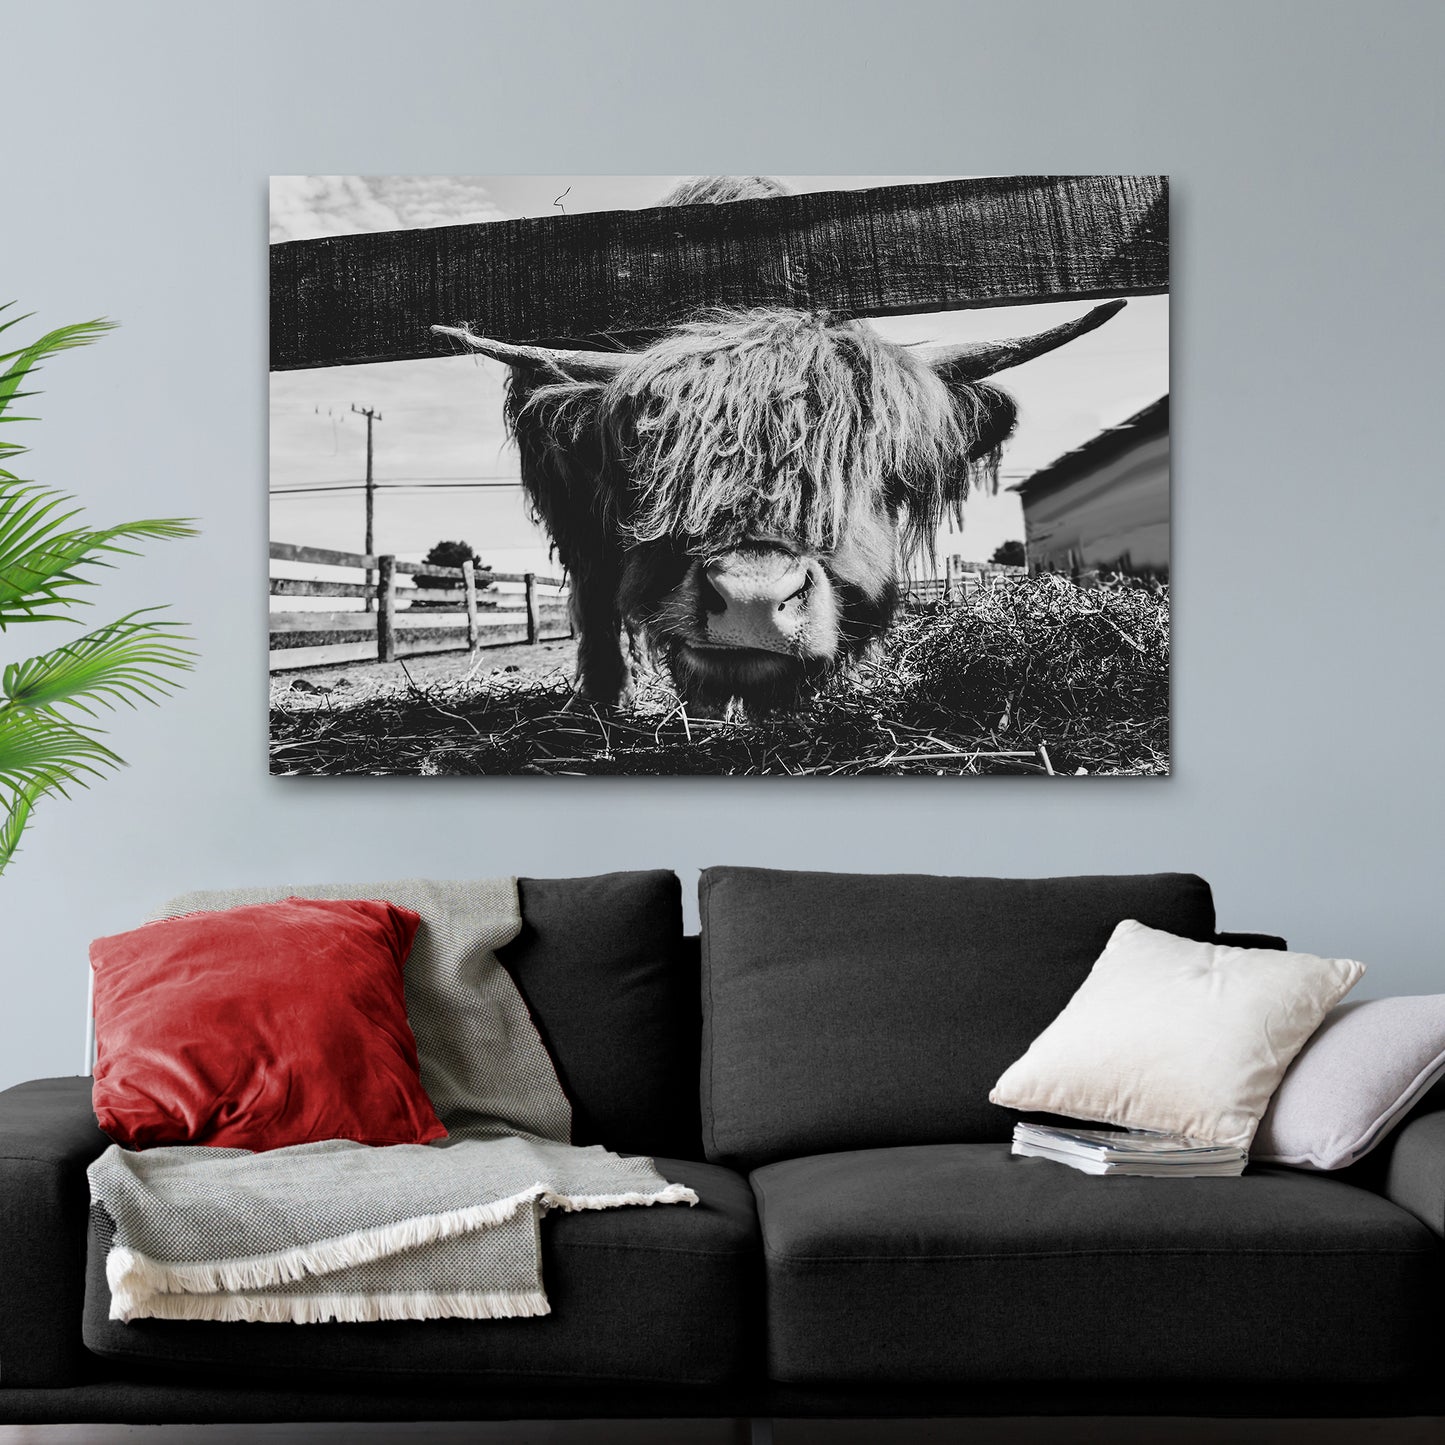 Curious Highland Cattle Monochrome Canvas Wall Art Style 2 - Image by Tailored Canvases